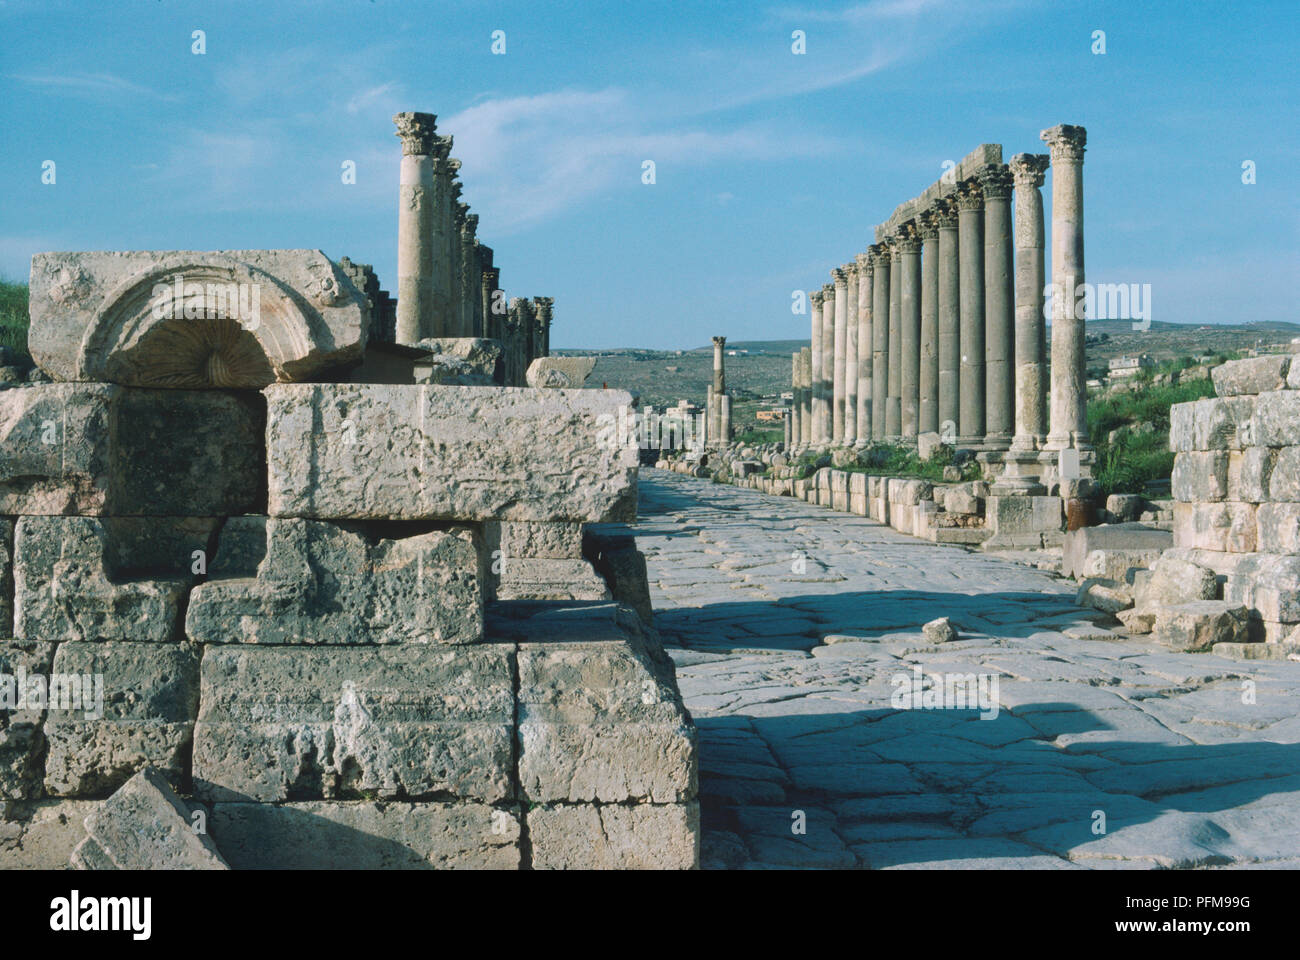 Jordan, Cardo Maximus, at the ancient Roman site of Jerash, 48 km north of Amman, one of the largest and most well-preserved sites of Roman architecture in the world outside Italy. Stock Photo